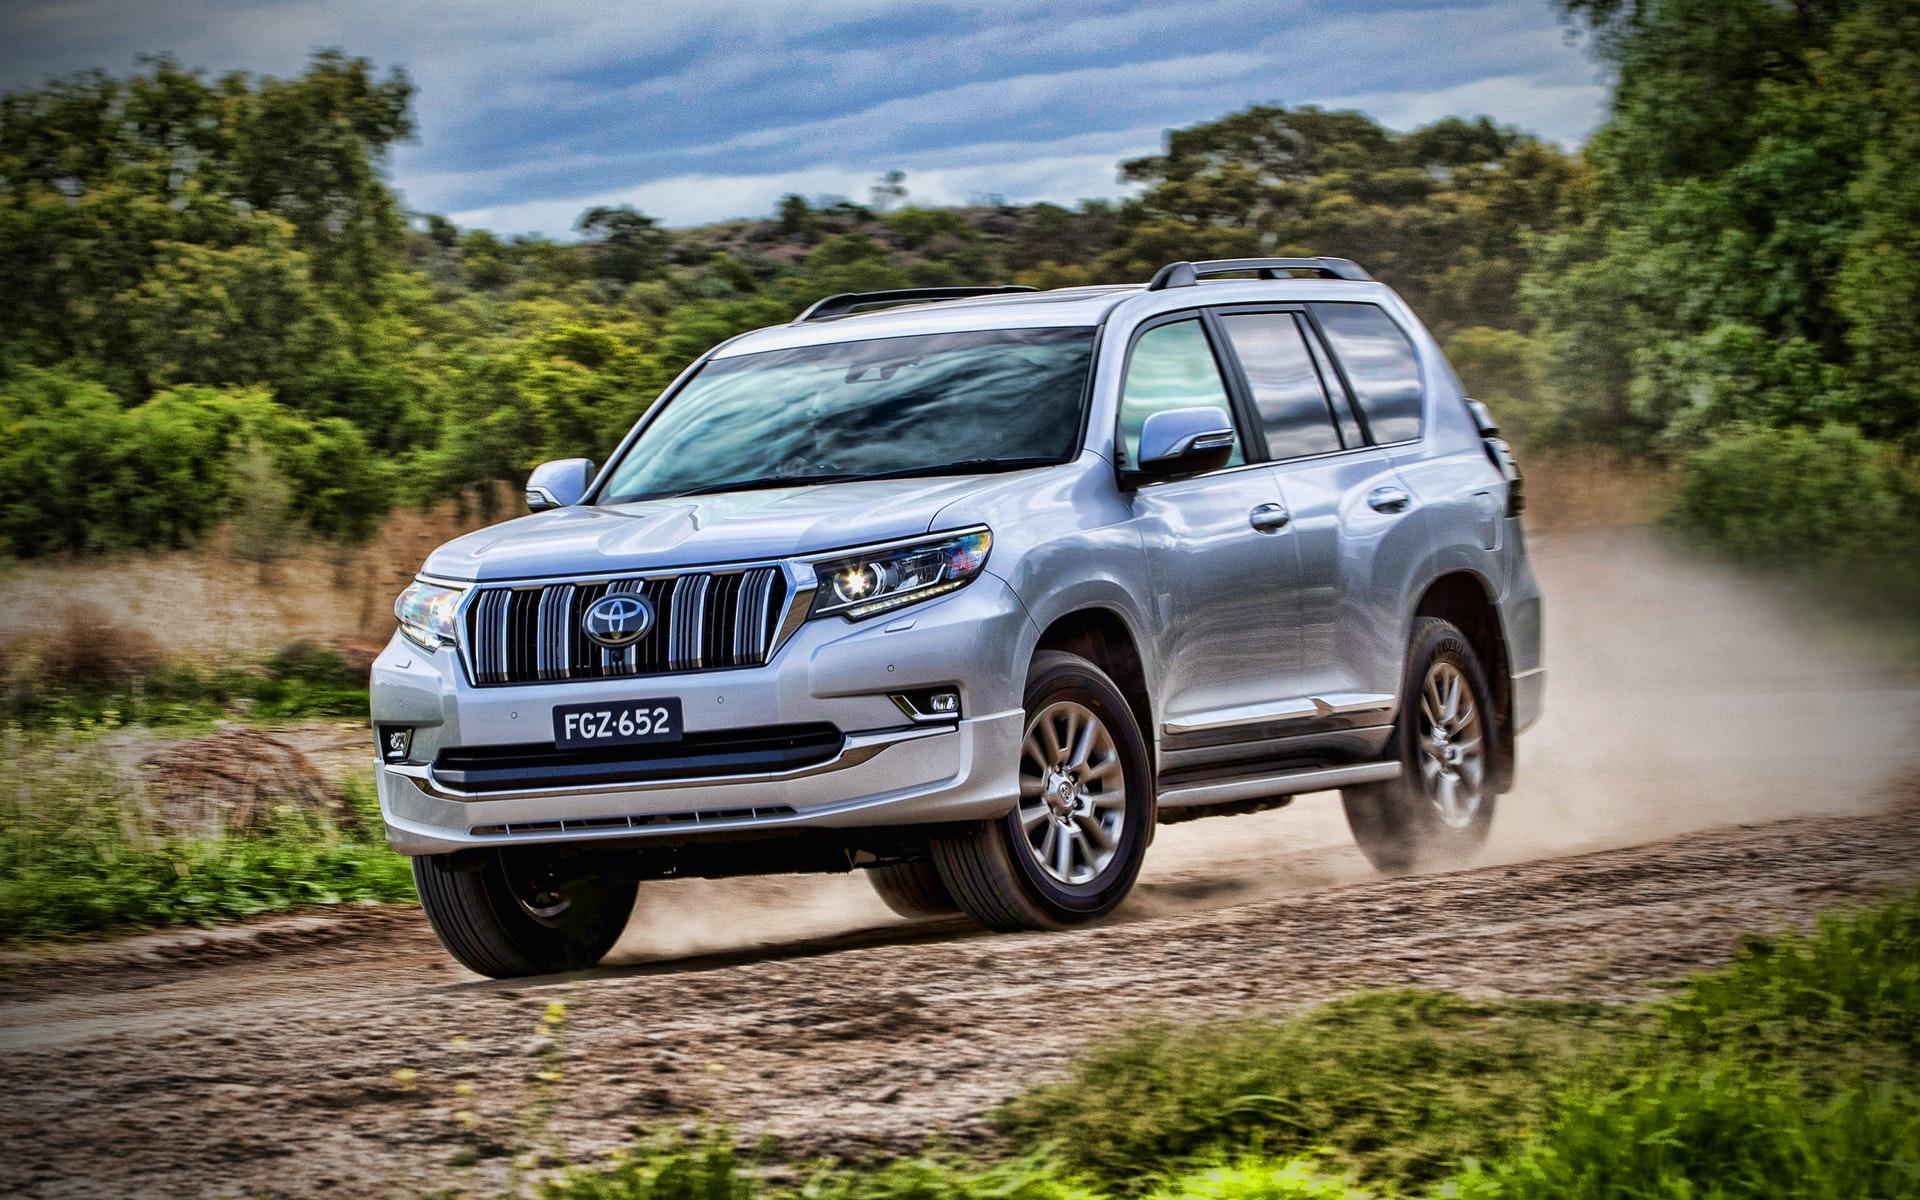 If you’re more interested in staying safe on the road, check out these great SUVs.